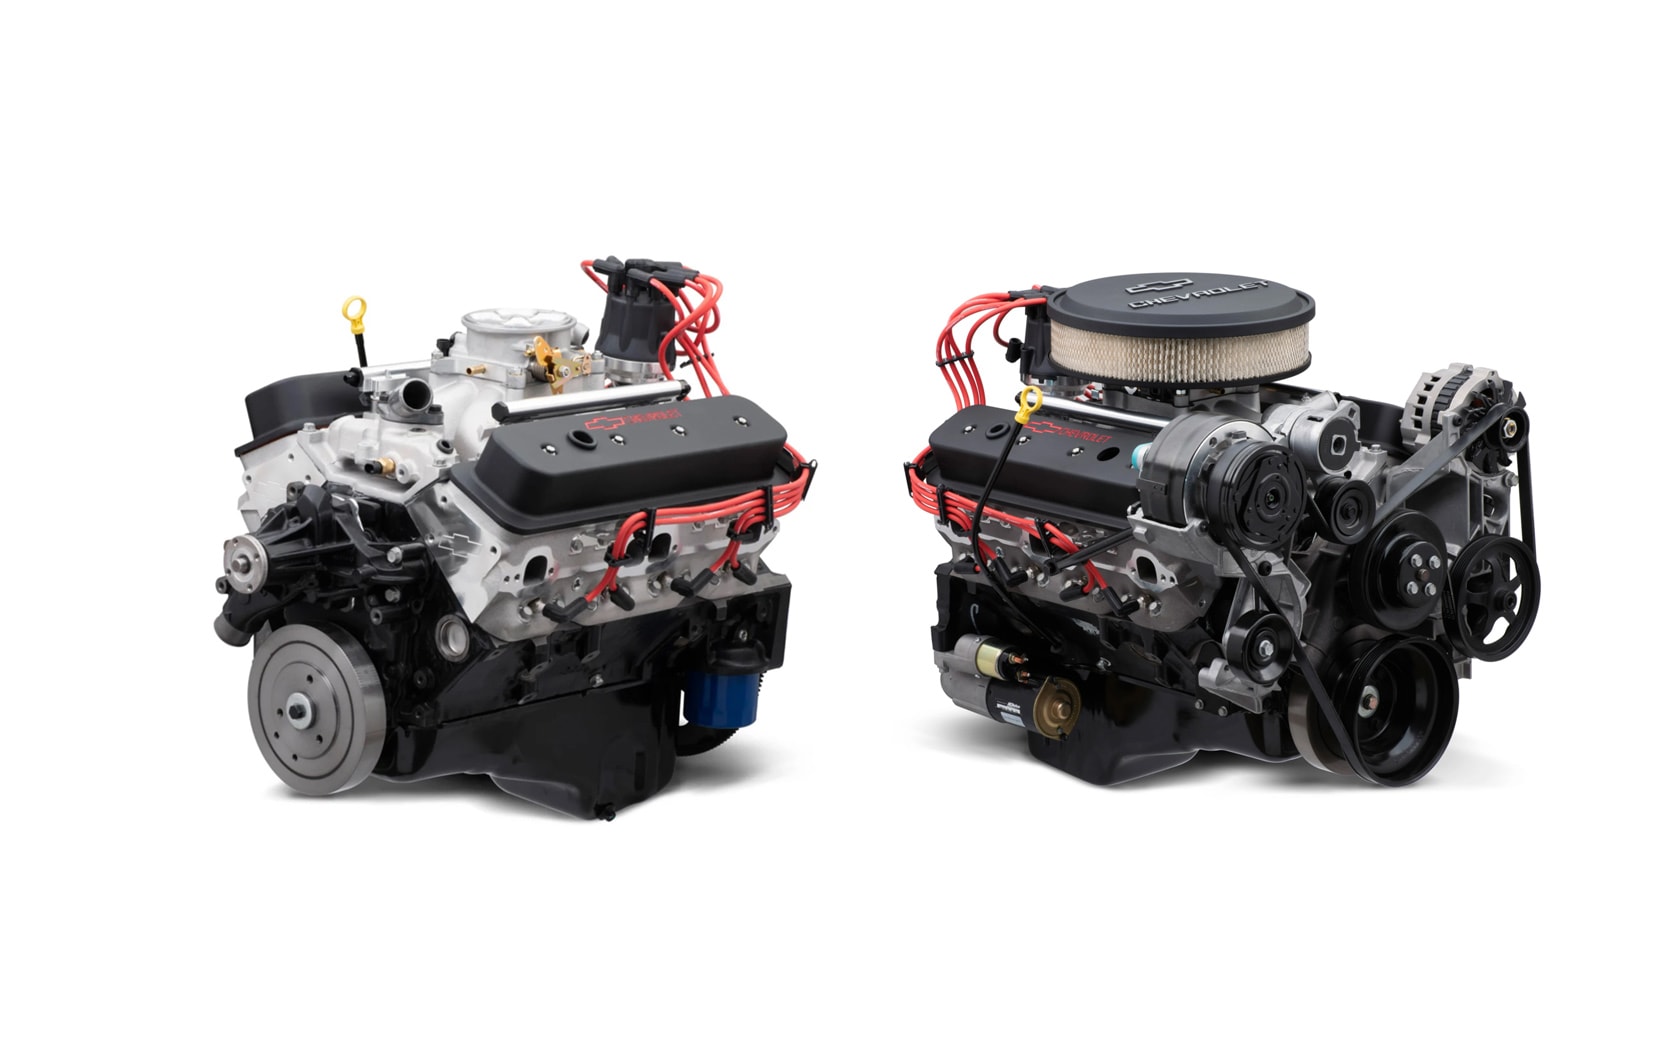 A Close Look At Chevrolet Performance S Sp3 Efi Small Block V8 Crate Engine Autoevolution